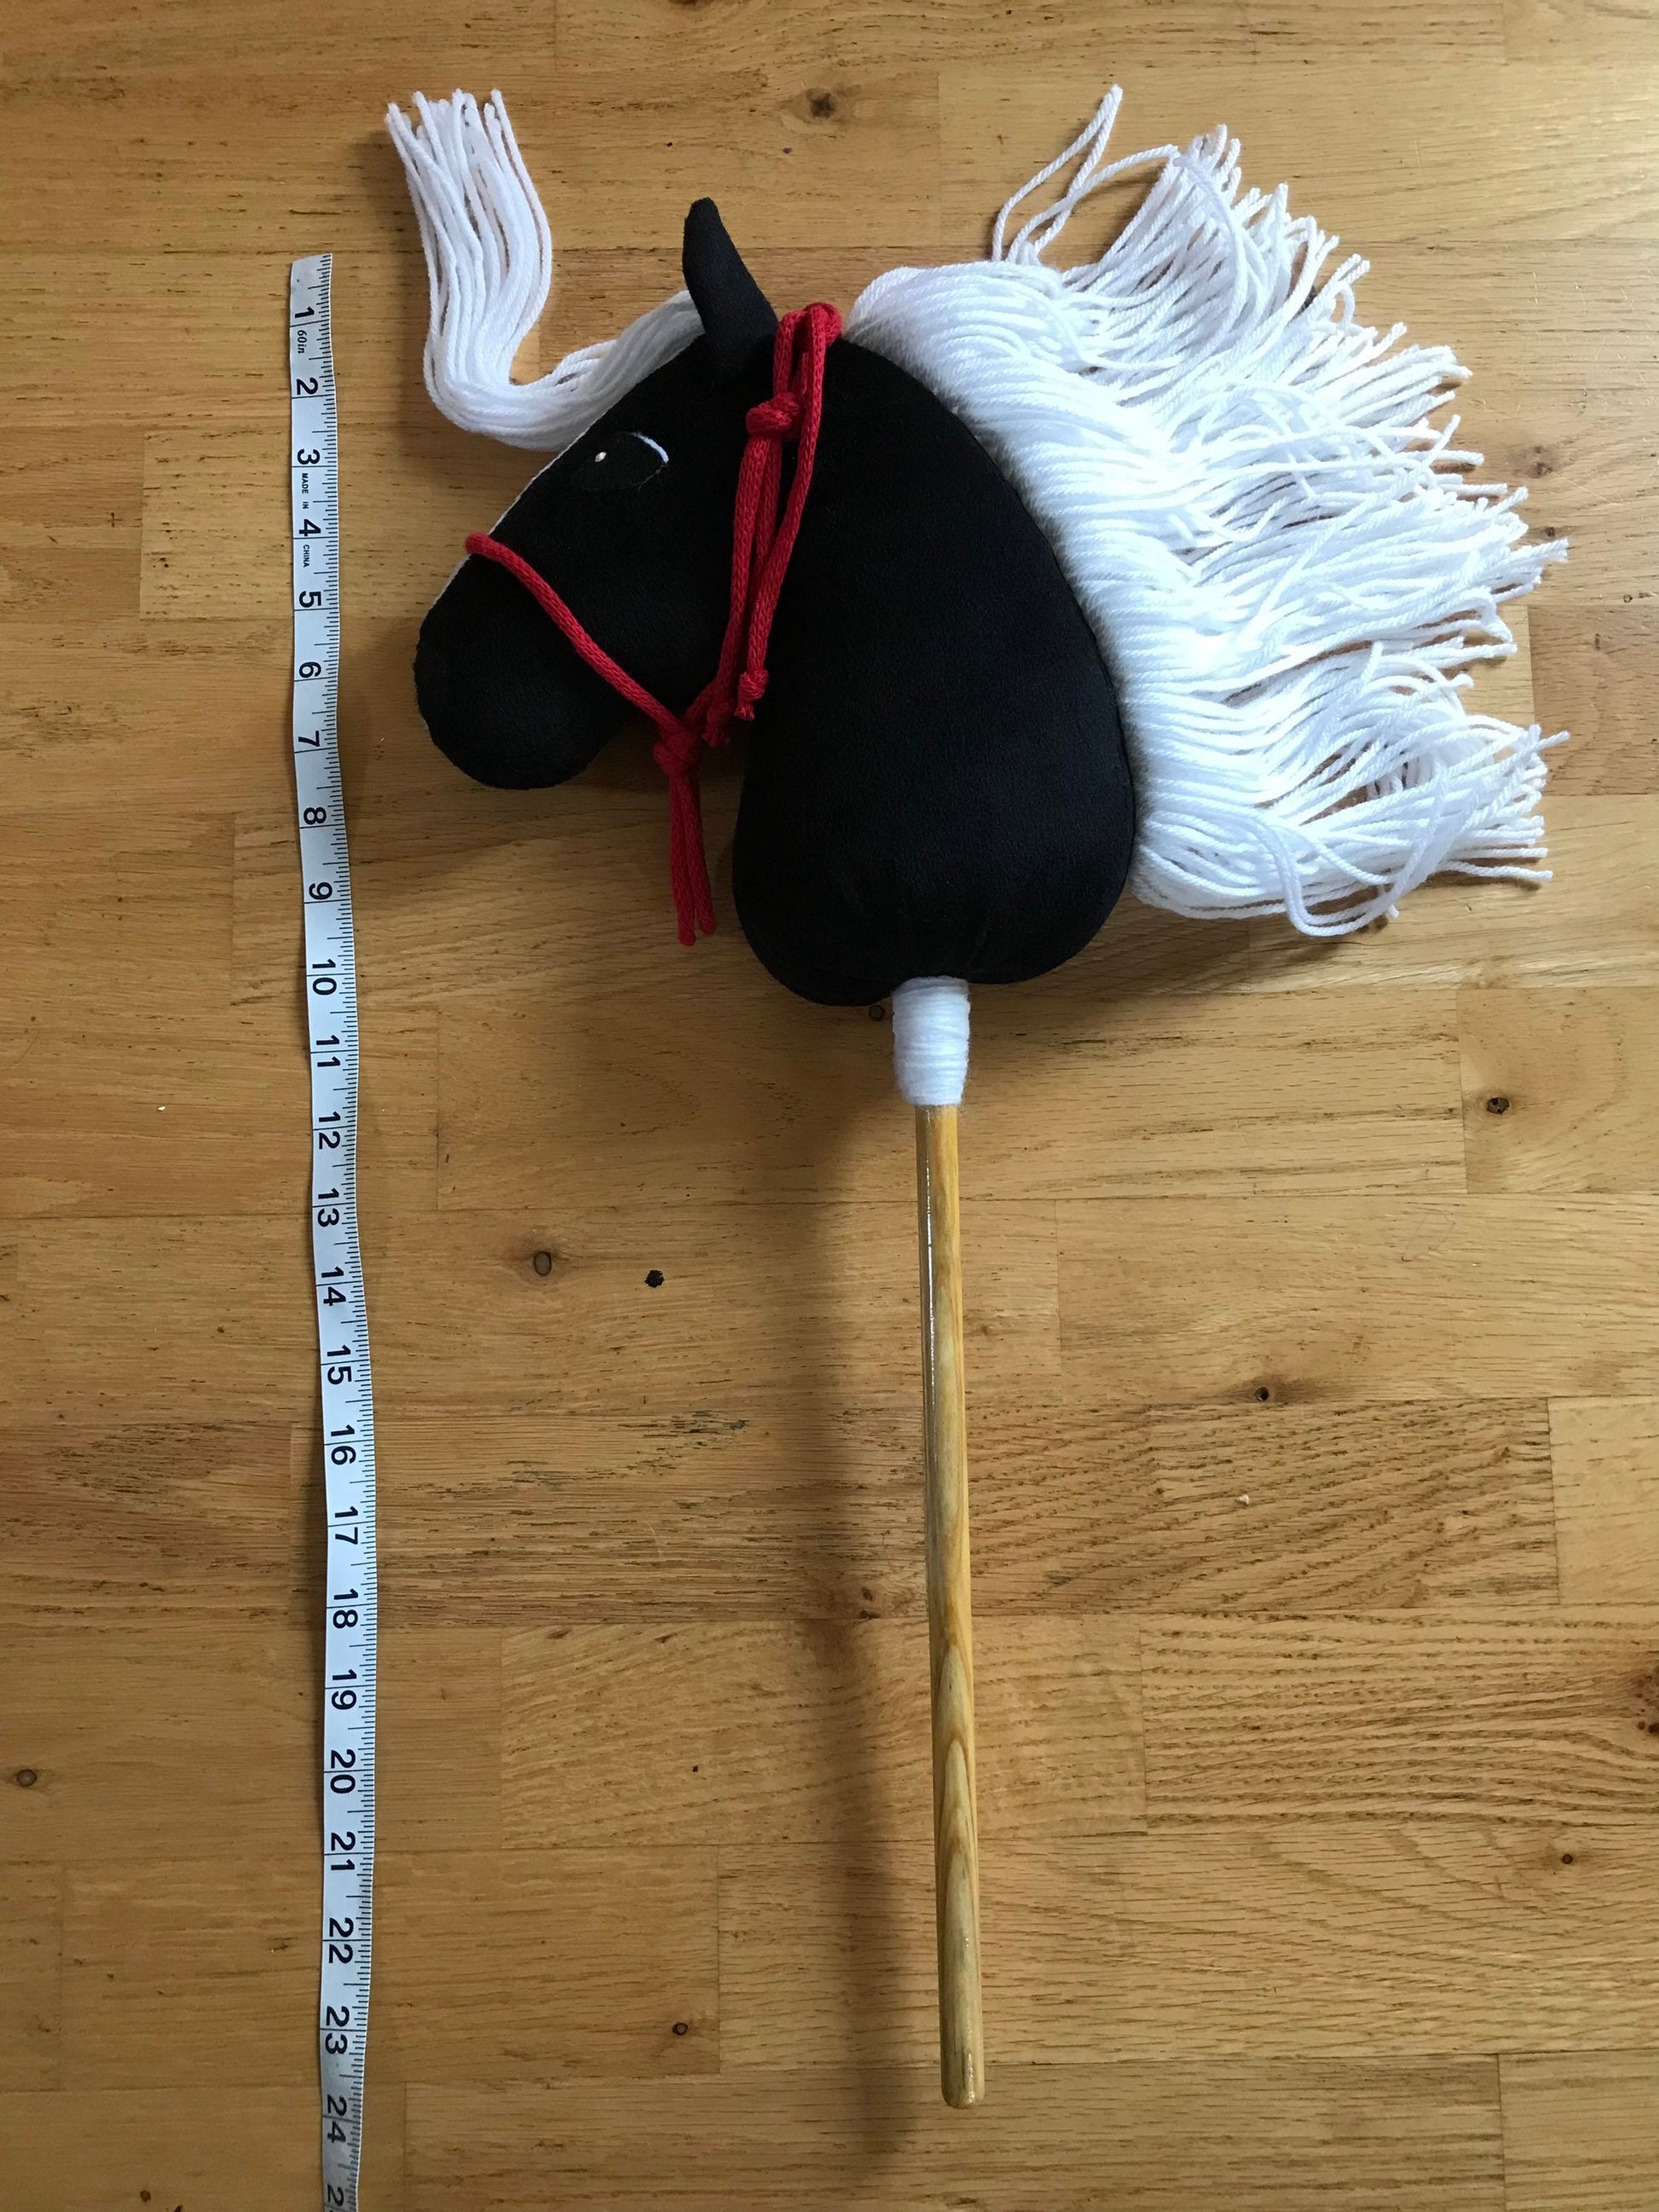 Hobby horse mini pony black on the floor next to measuring tape to show the length